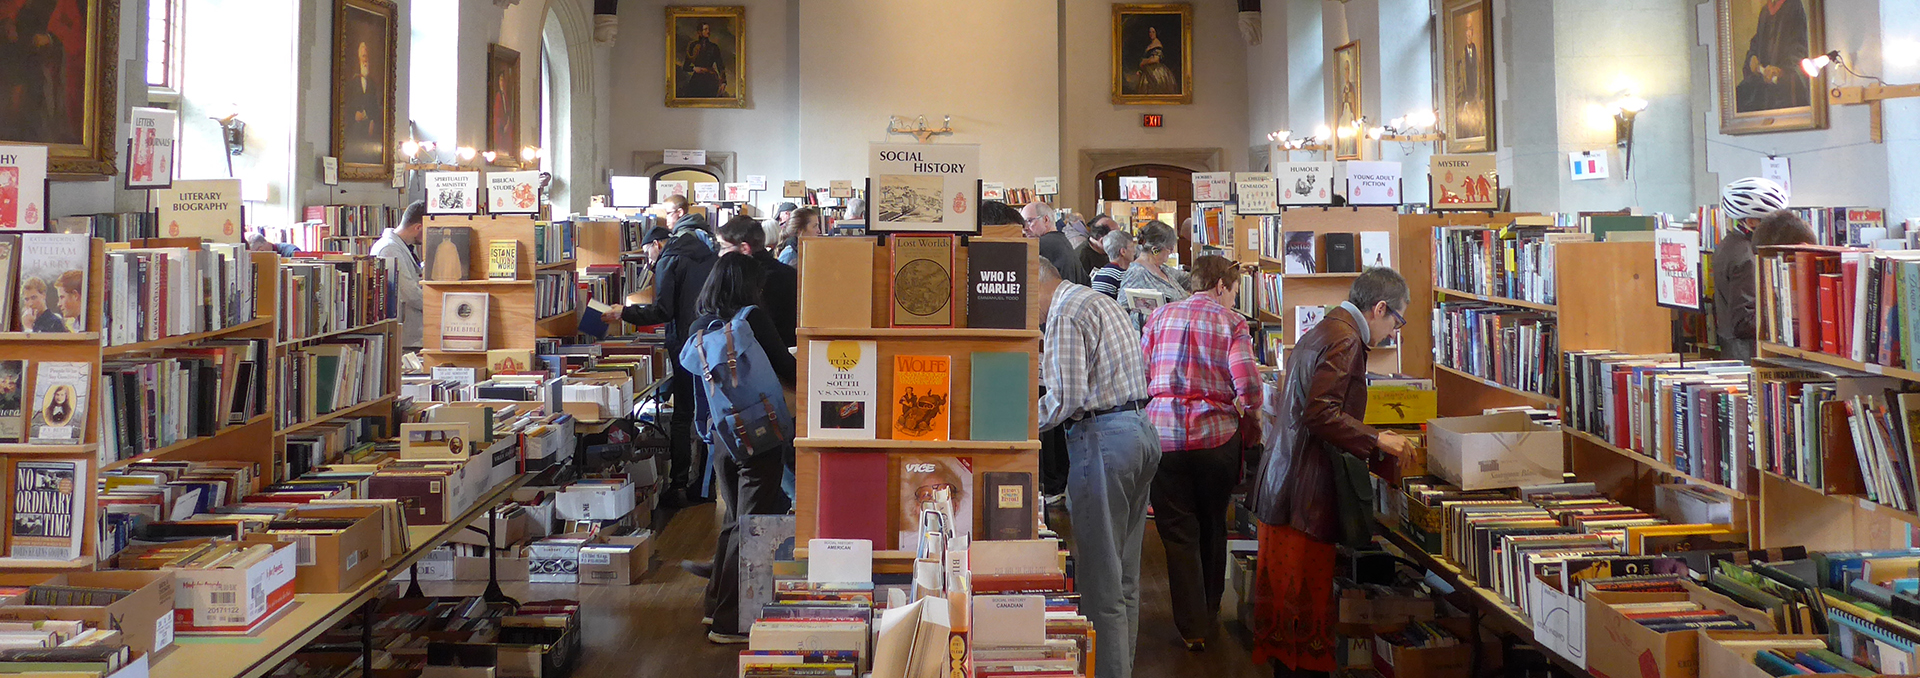 Shoppers at the Book Sale in Seeley Hall